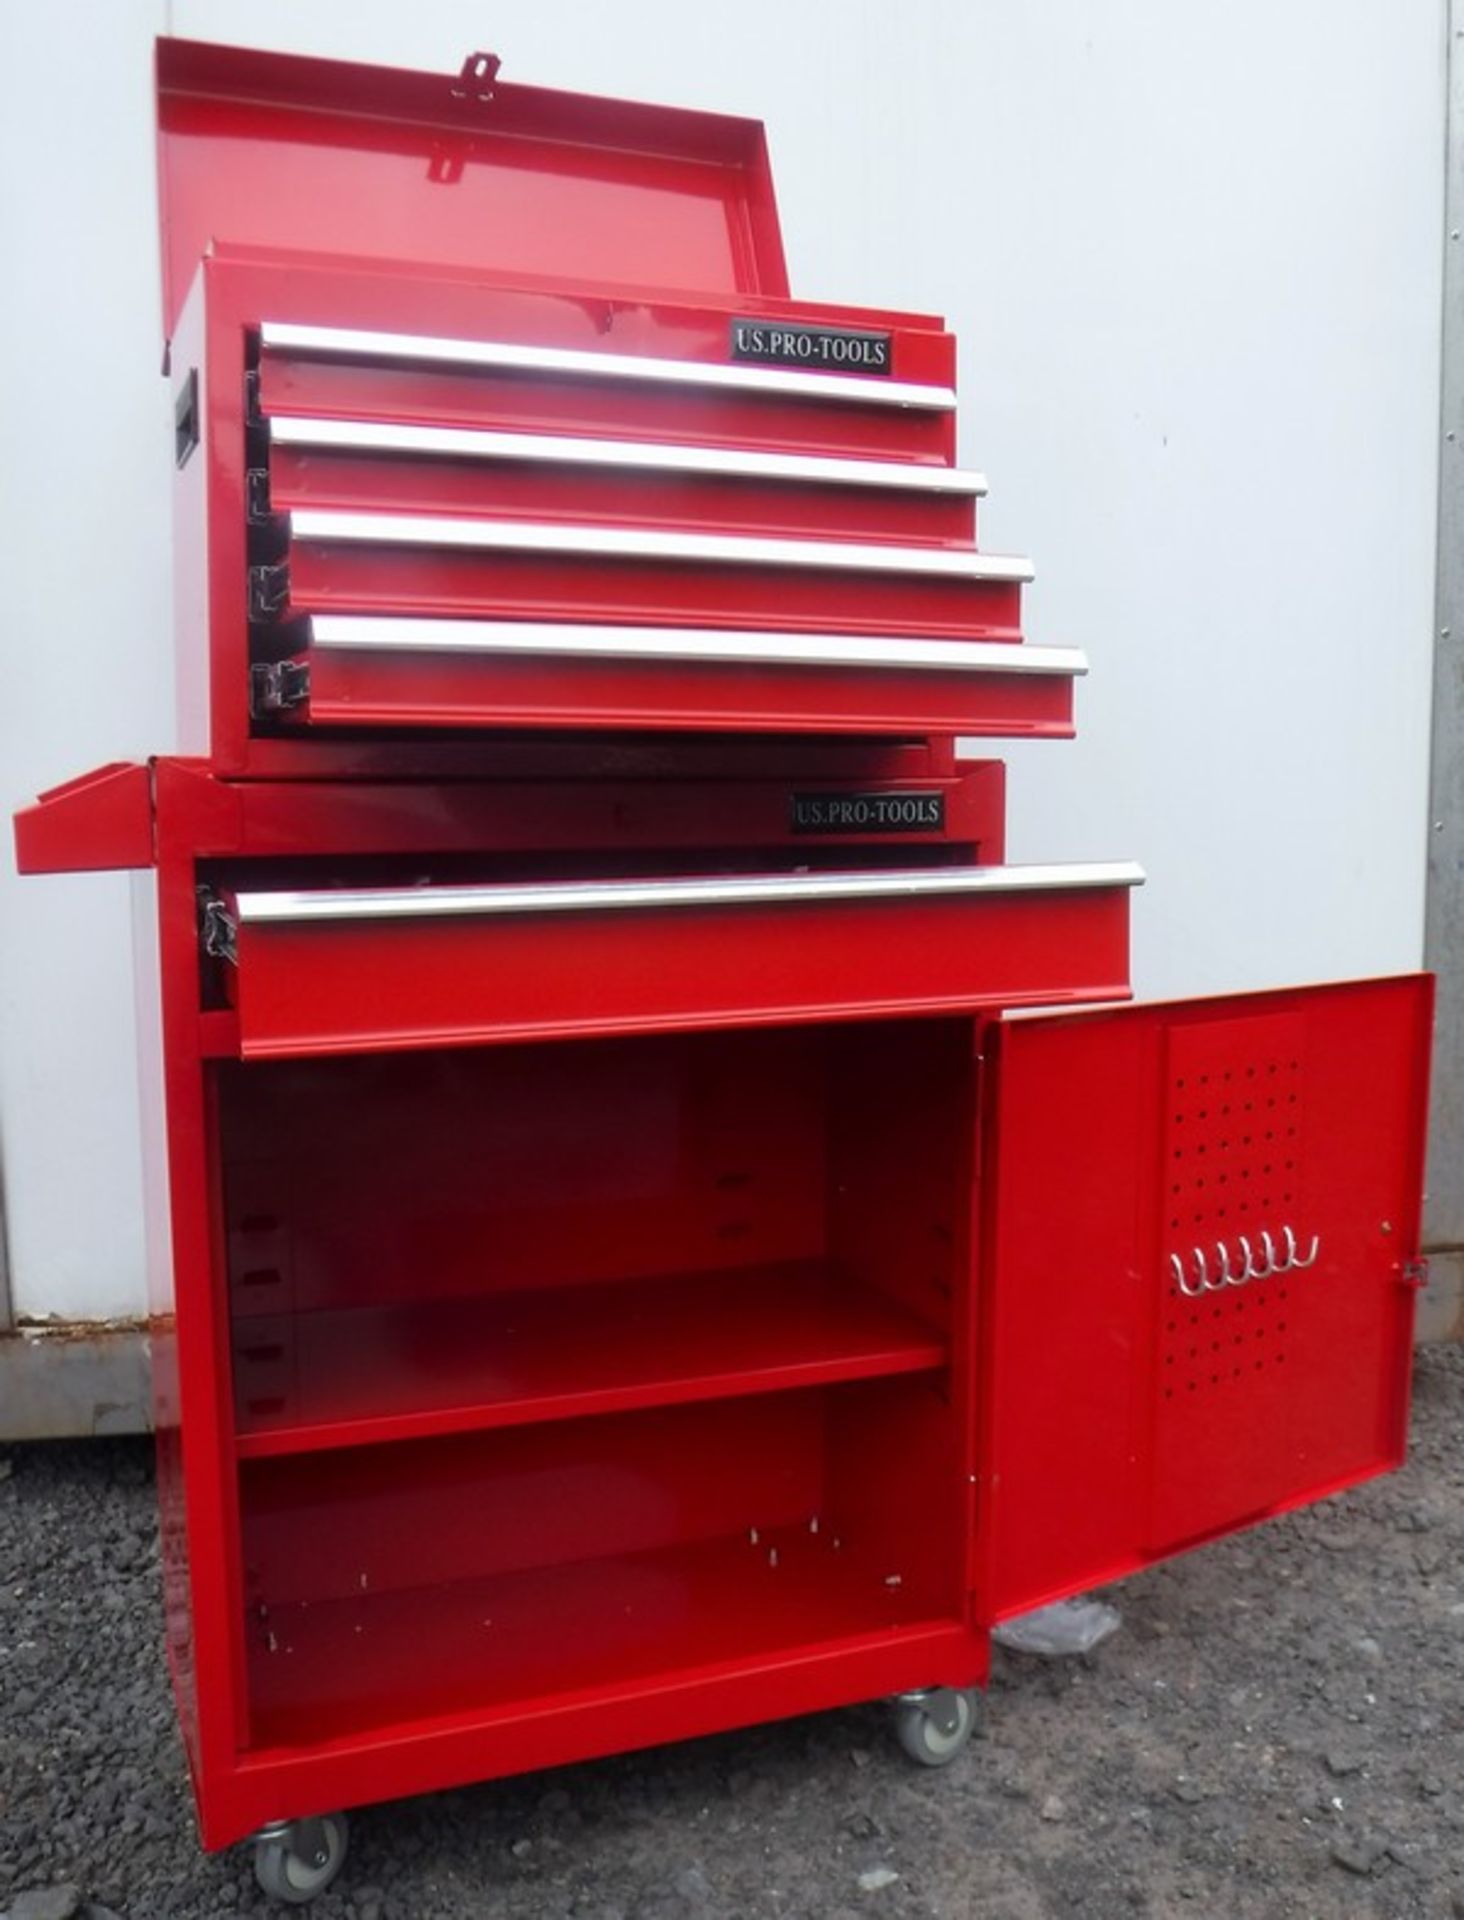 HIGH QUALITY CHEST TOOL BOX c/w ball bearing slide drawers. Body reinforced design. Can be locked wi